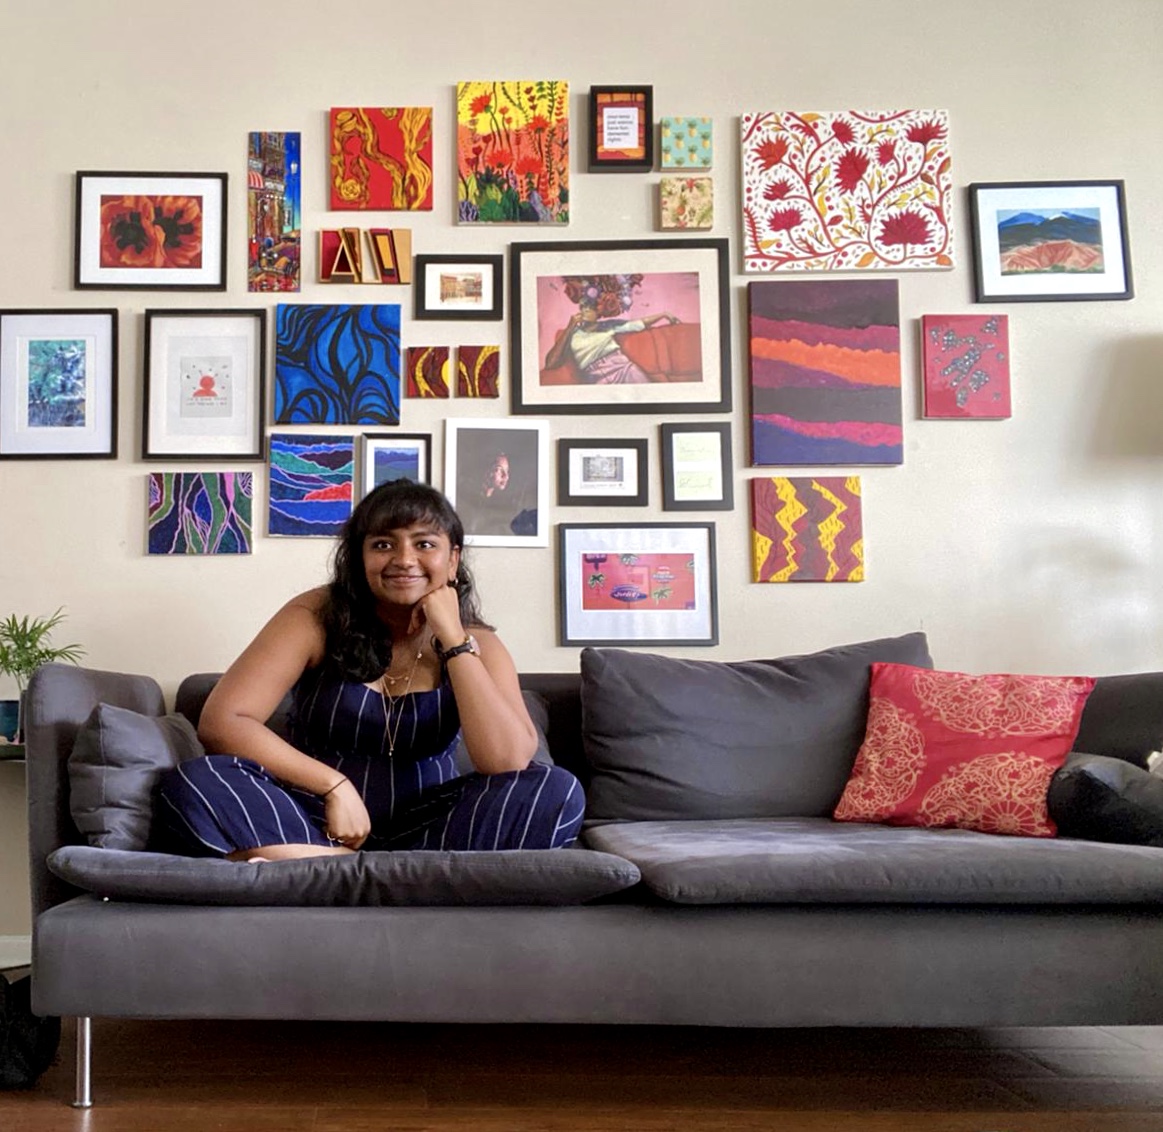 Woman smiling, sitting on on a couch with wall of art behind her